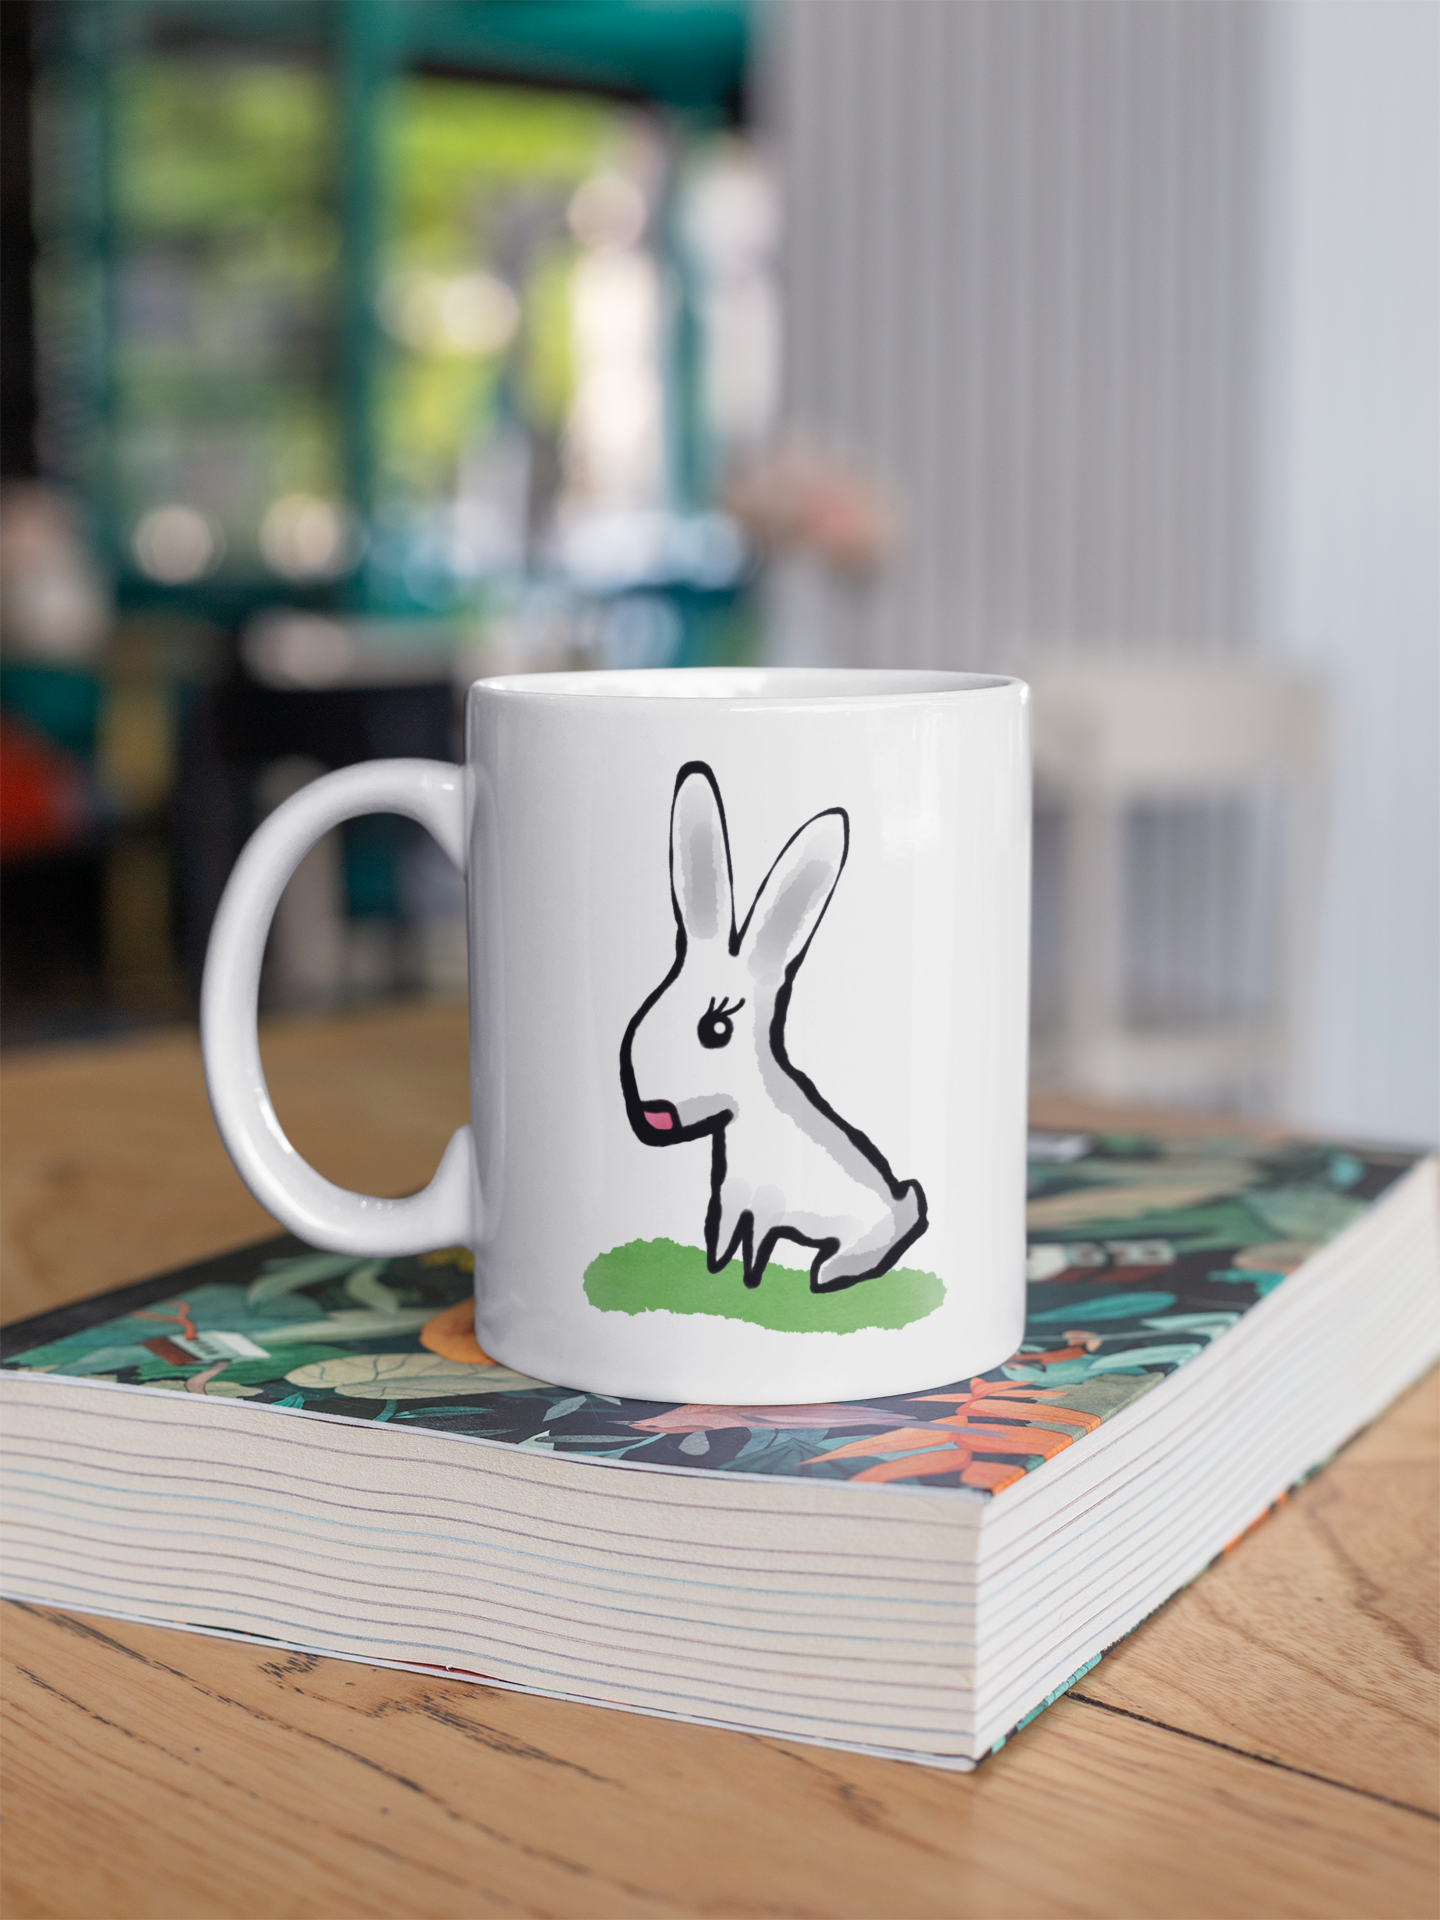 Cute Bunny coffee mug illustration by Hector and Bone - sitting on a book at home